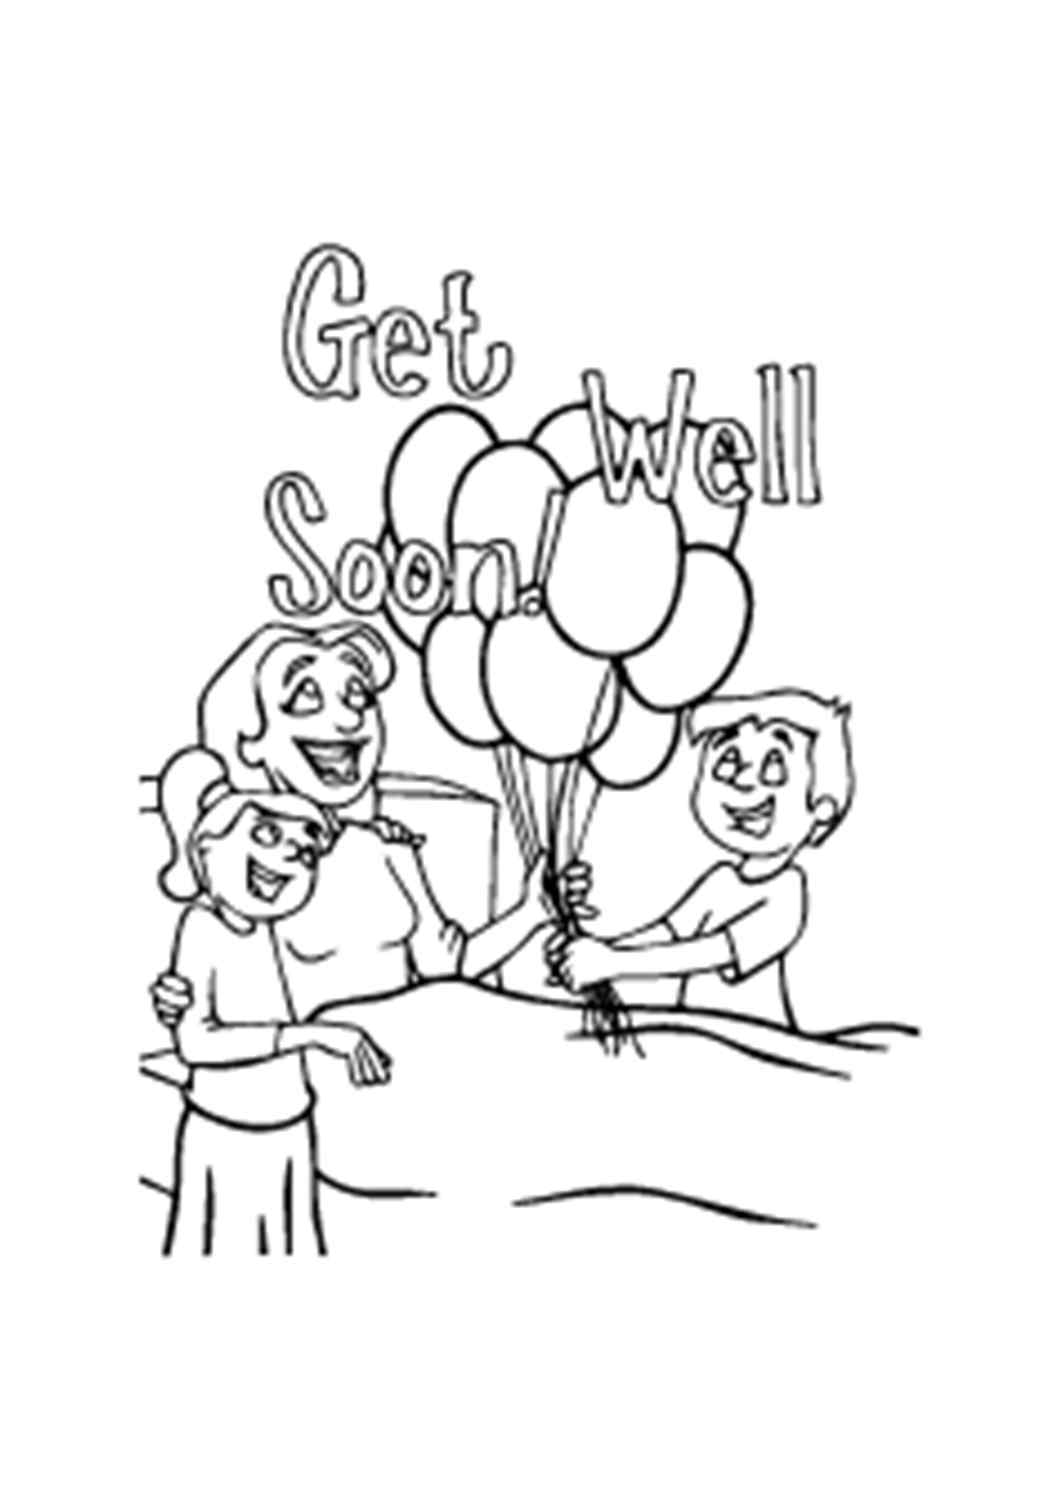 Get Well Soon With Mom